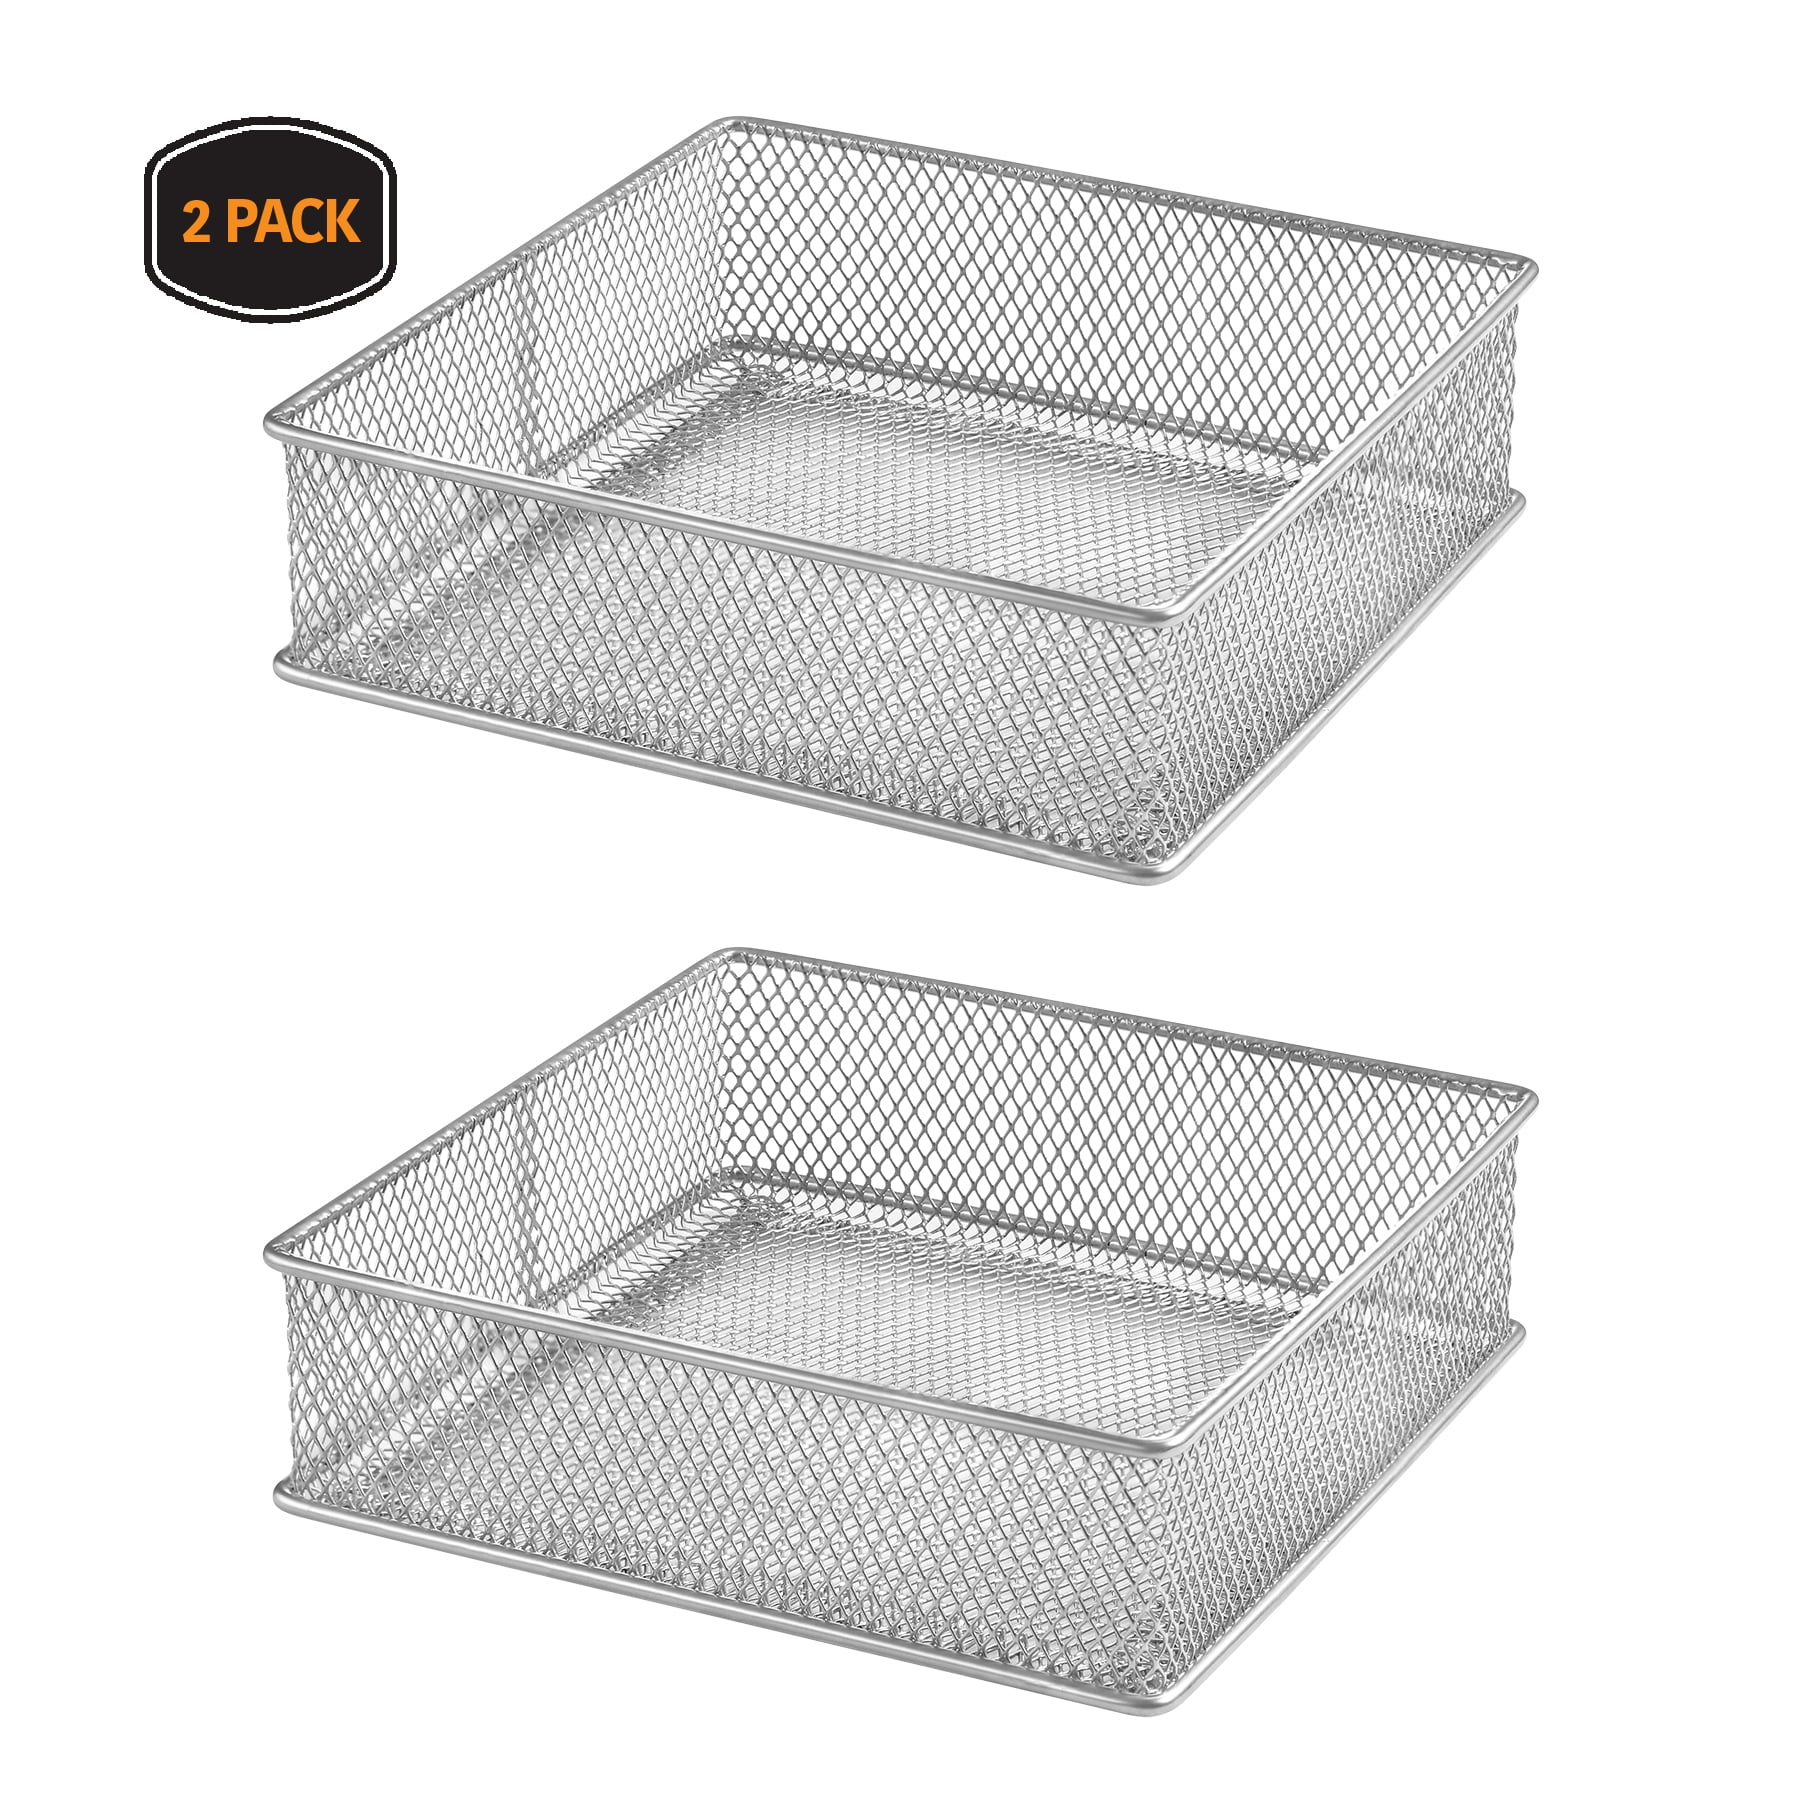 Silver Mesh Desk Drawer Organizer Tray for Home and Office Pack of 2 